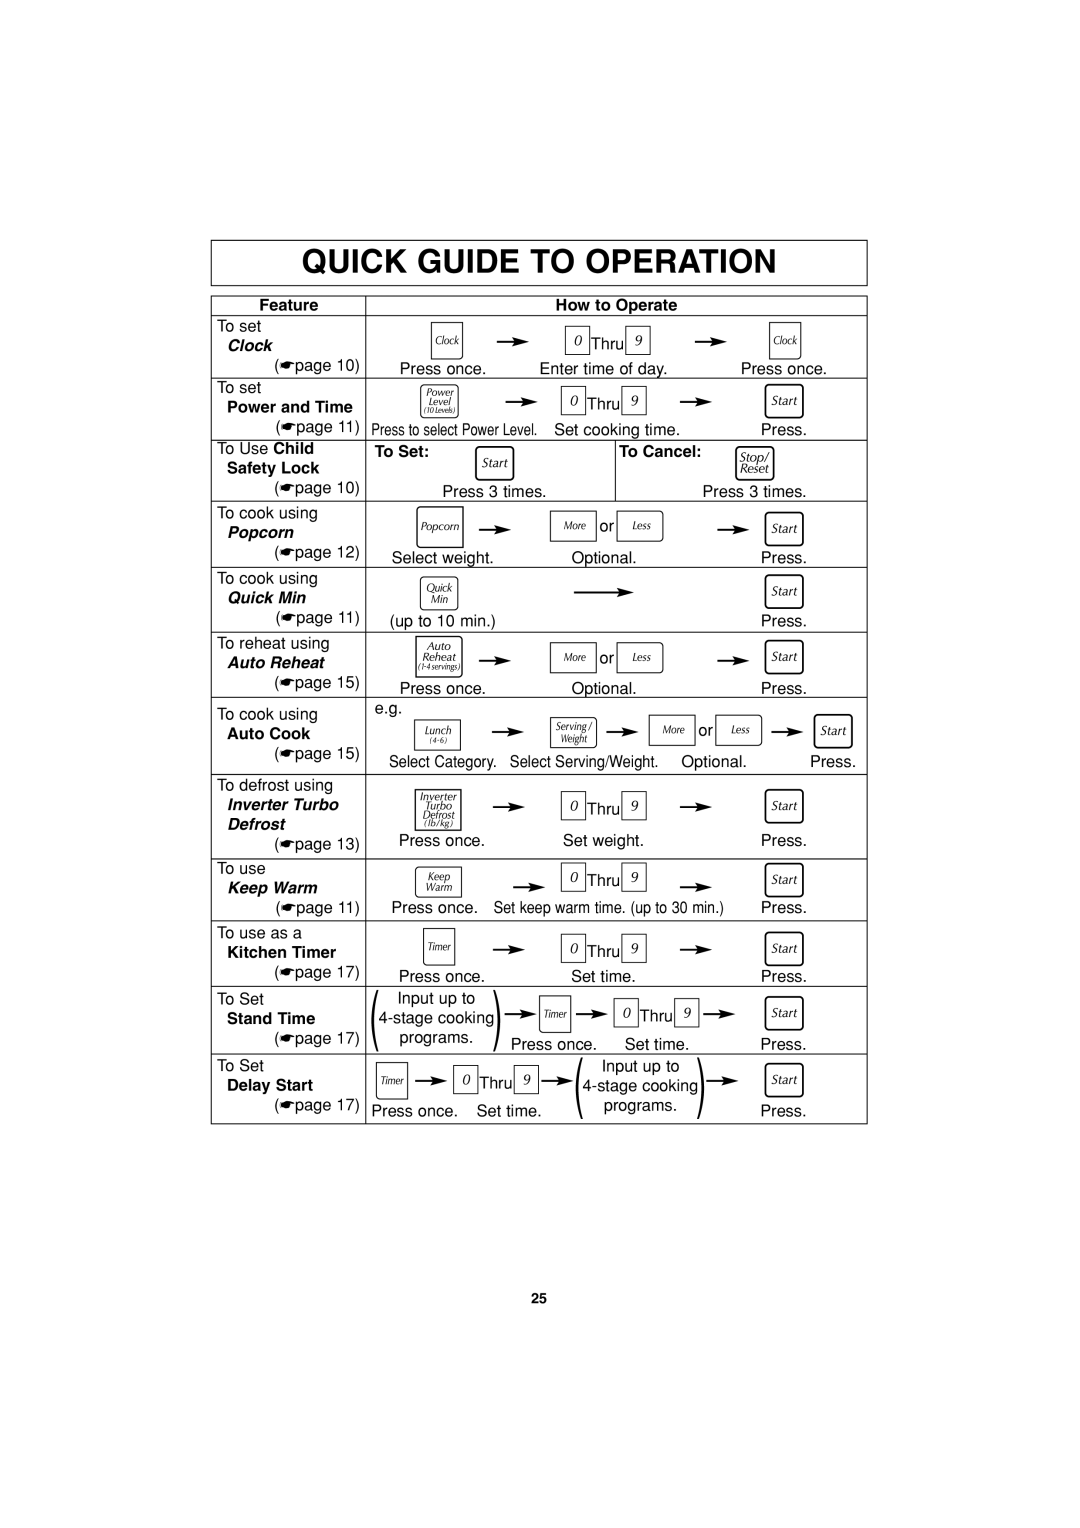 Panasonic NN-S953 Quick Guide To Operation, Feature, How to Operate, Clock, Power and Time, To Set, To Cancel, Safety Lock 